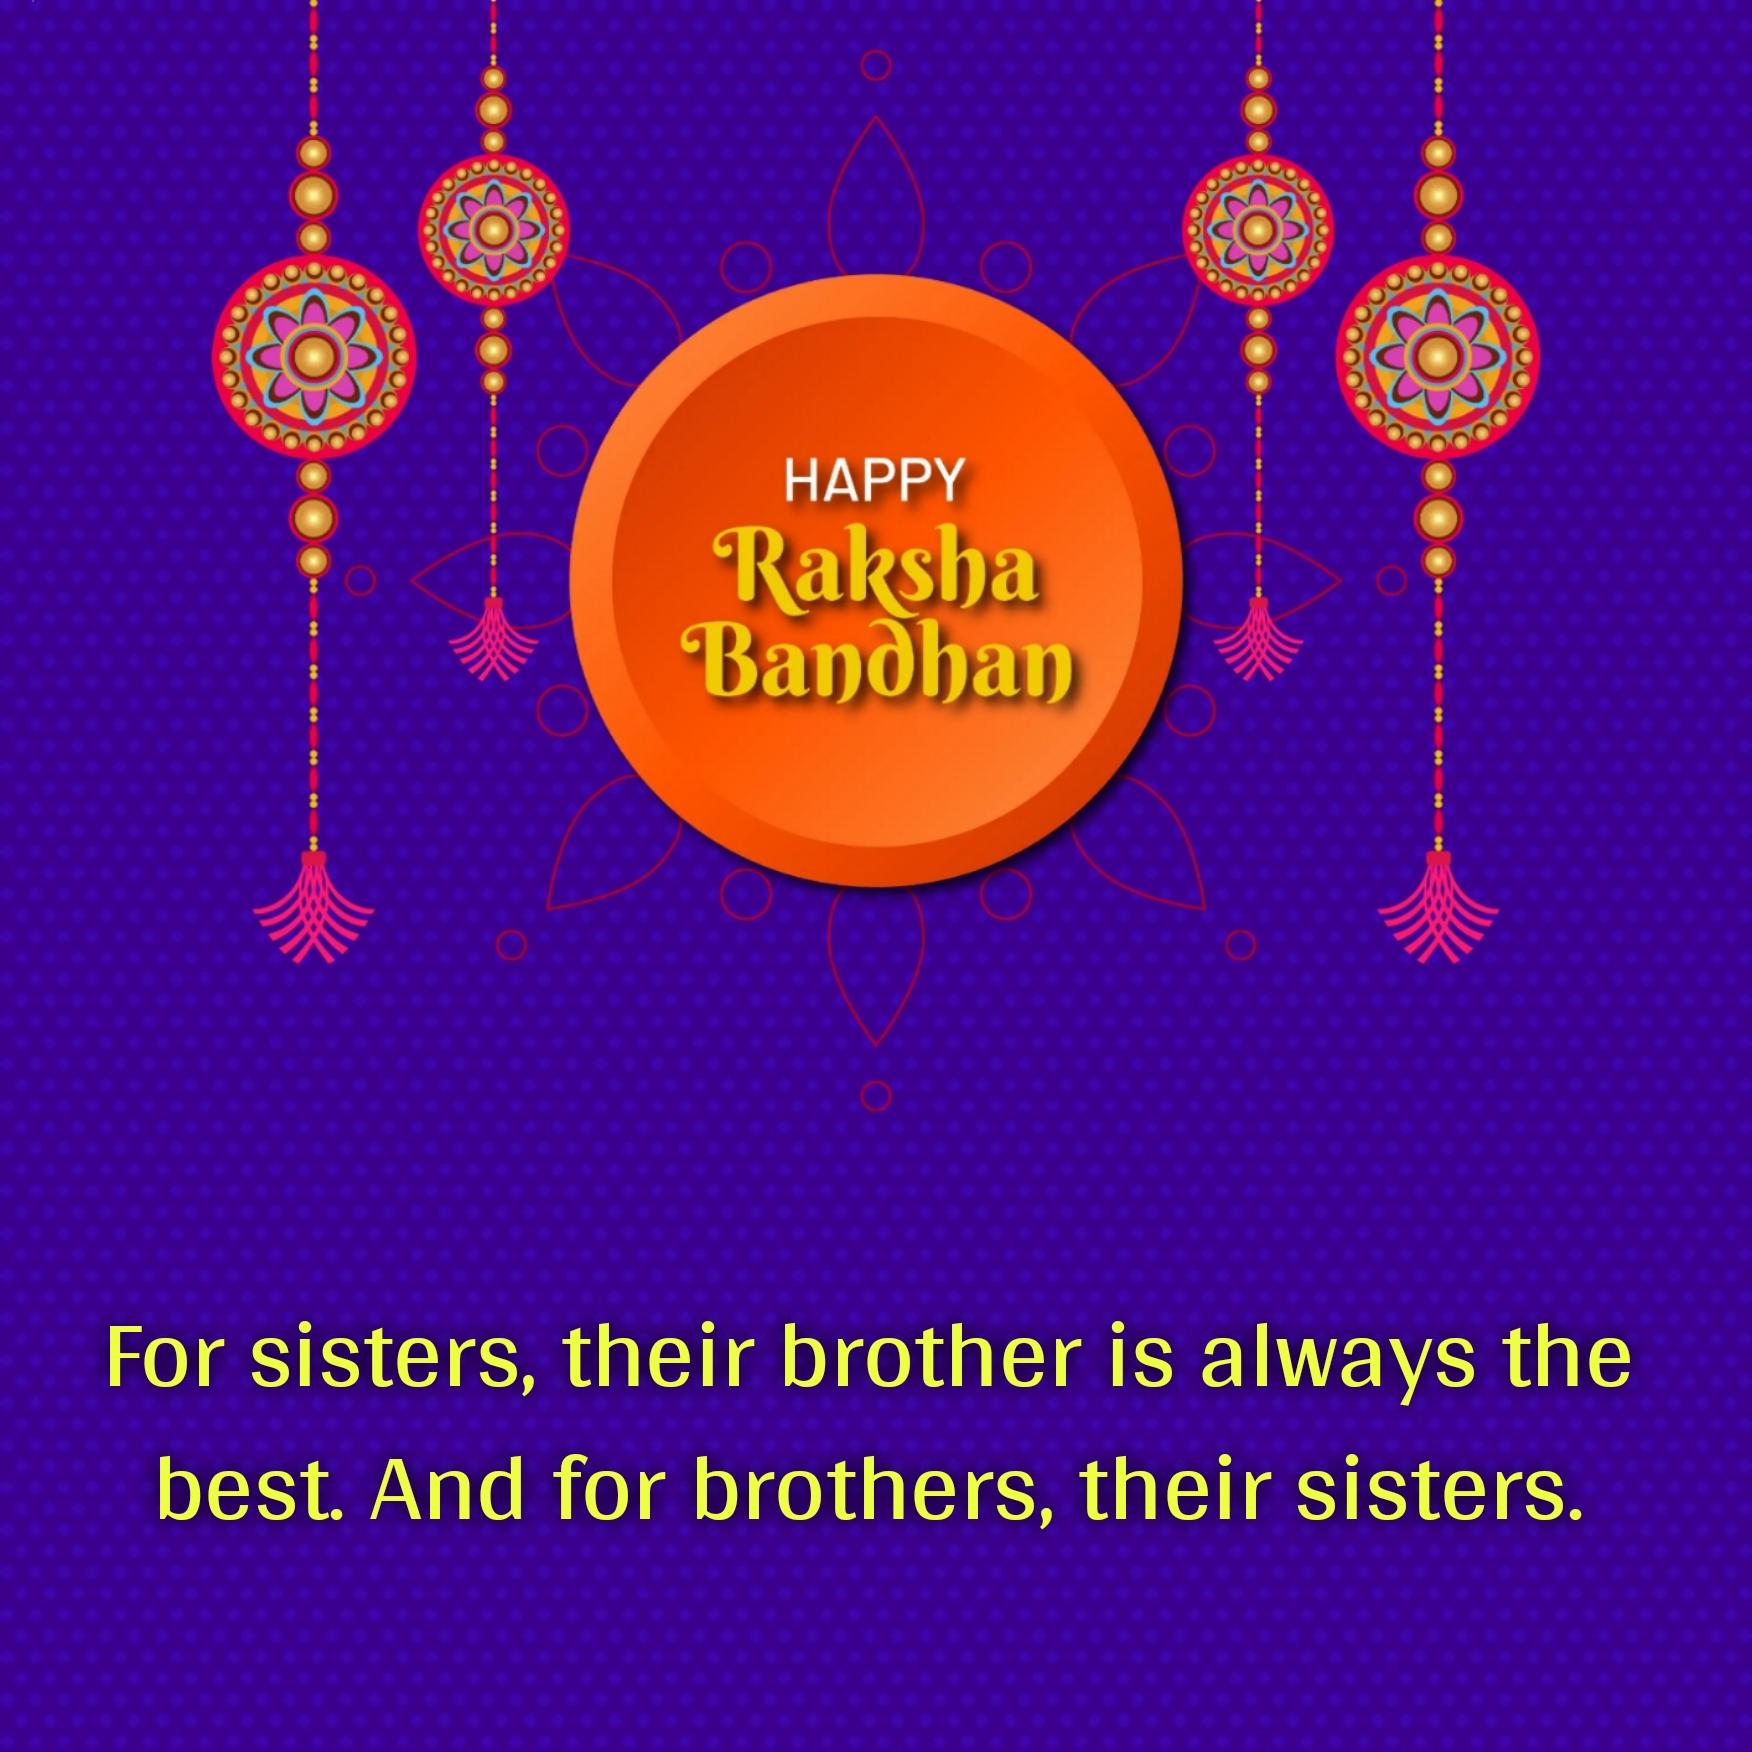 For sisters their brother is always the best